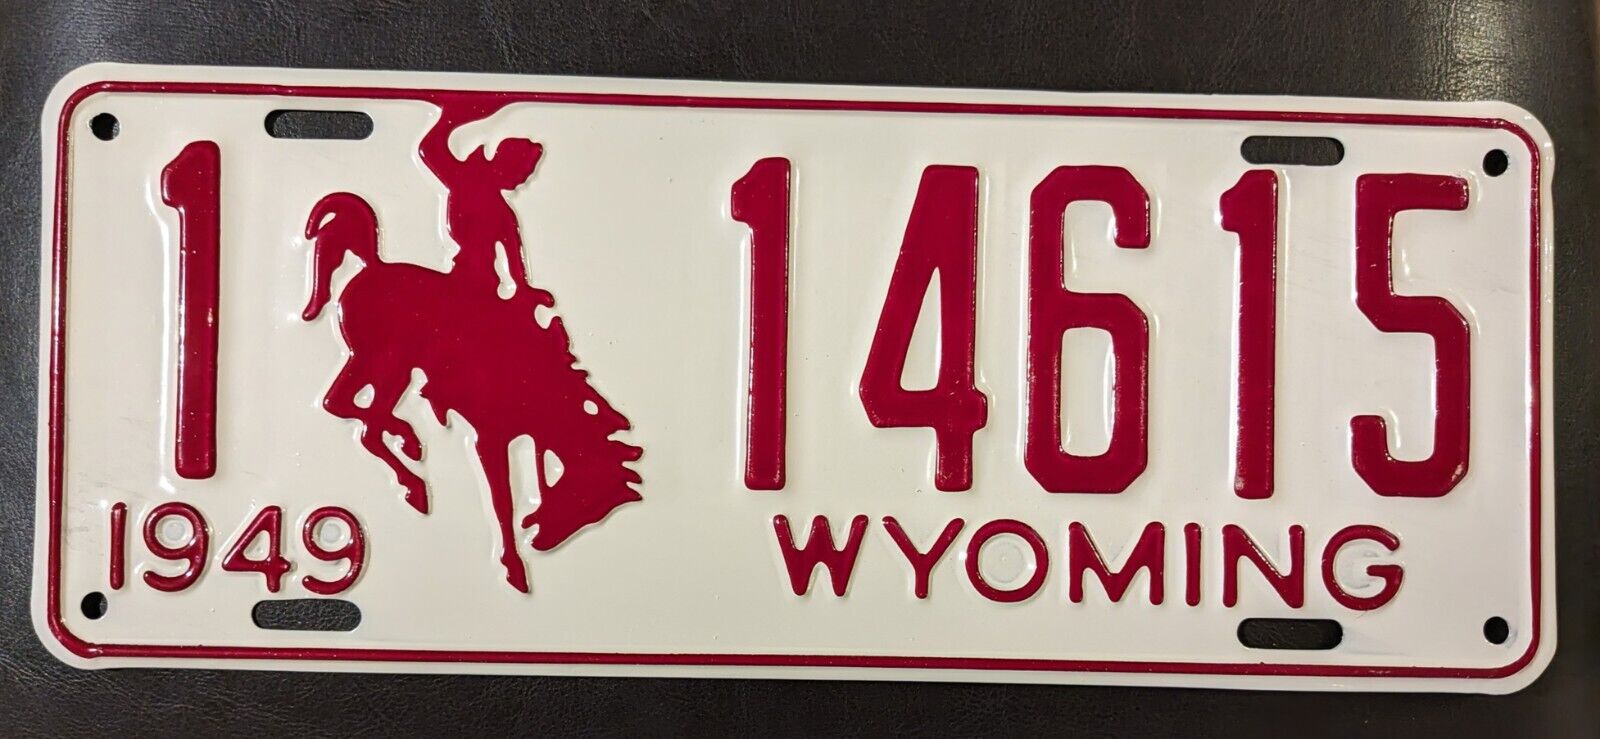 All Original 1949 Wyoming License Plate- Mint Never Used With Original Envelope